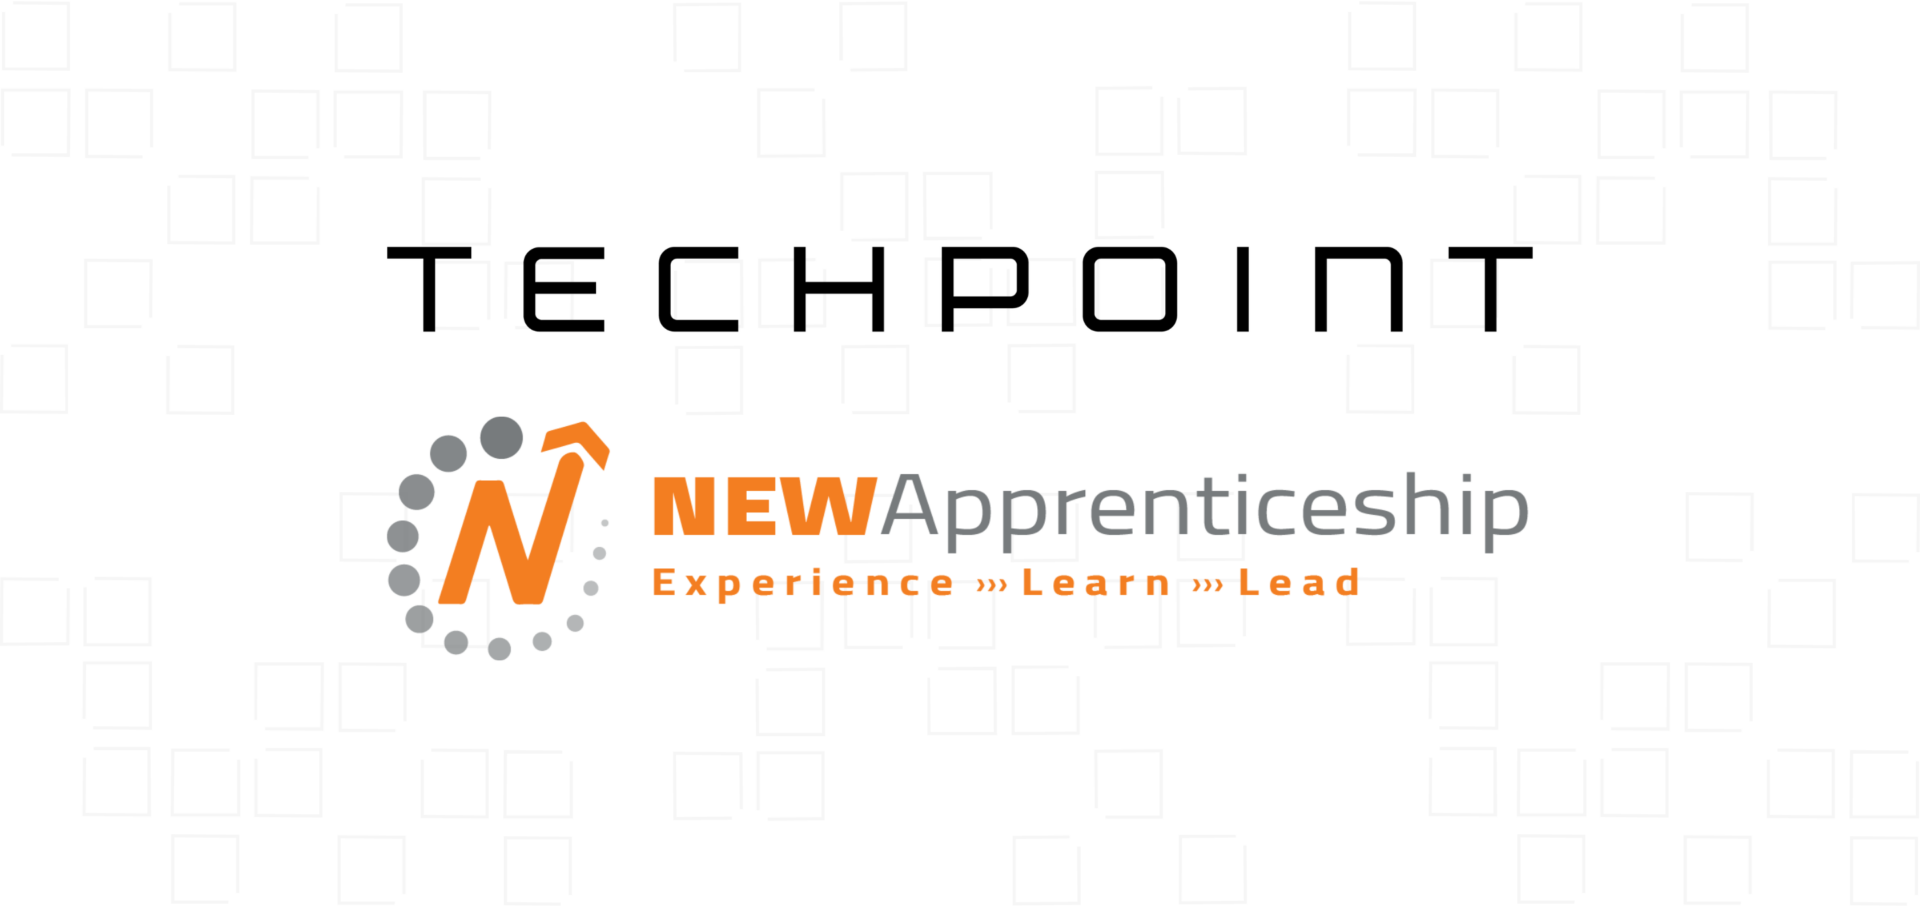 TechPoint partners with New Apprenticeship TMto dramatically expand workforce